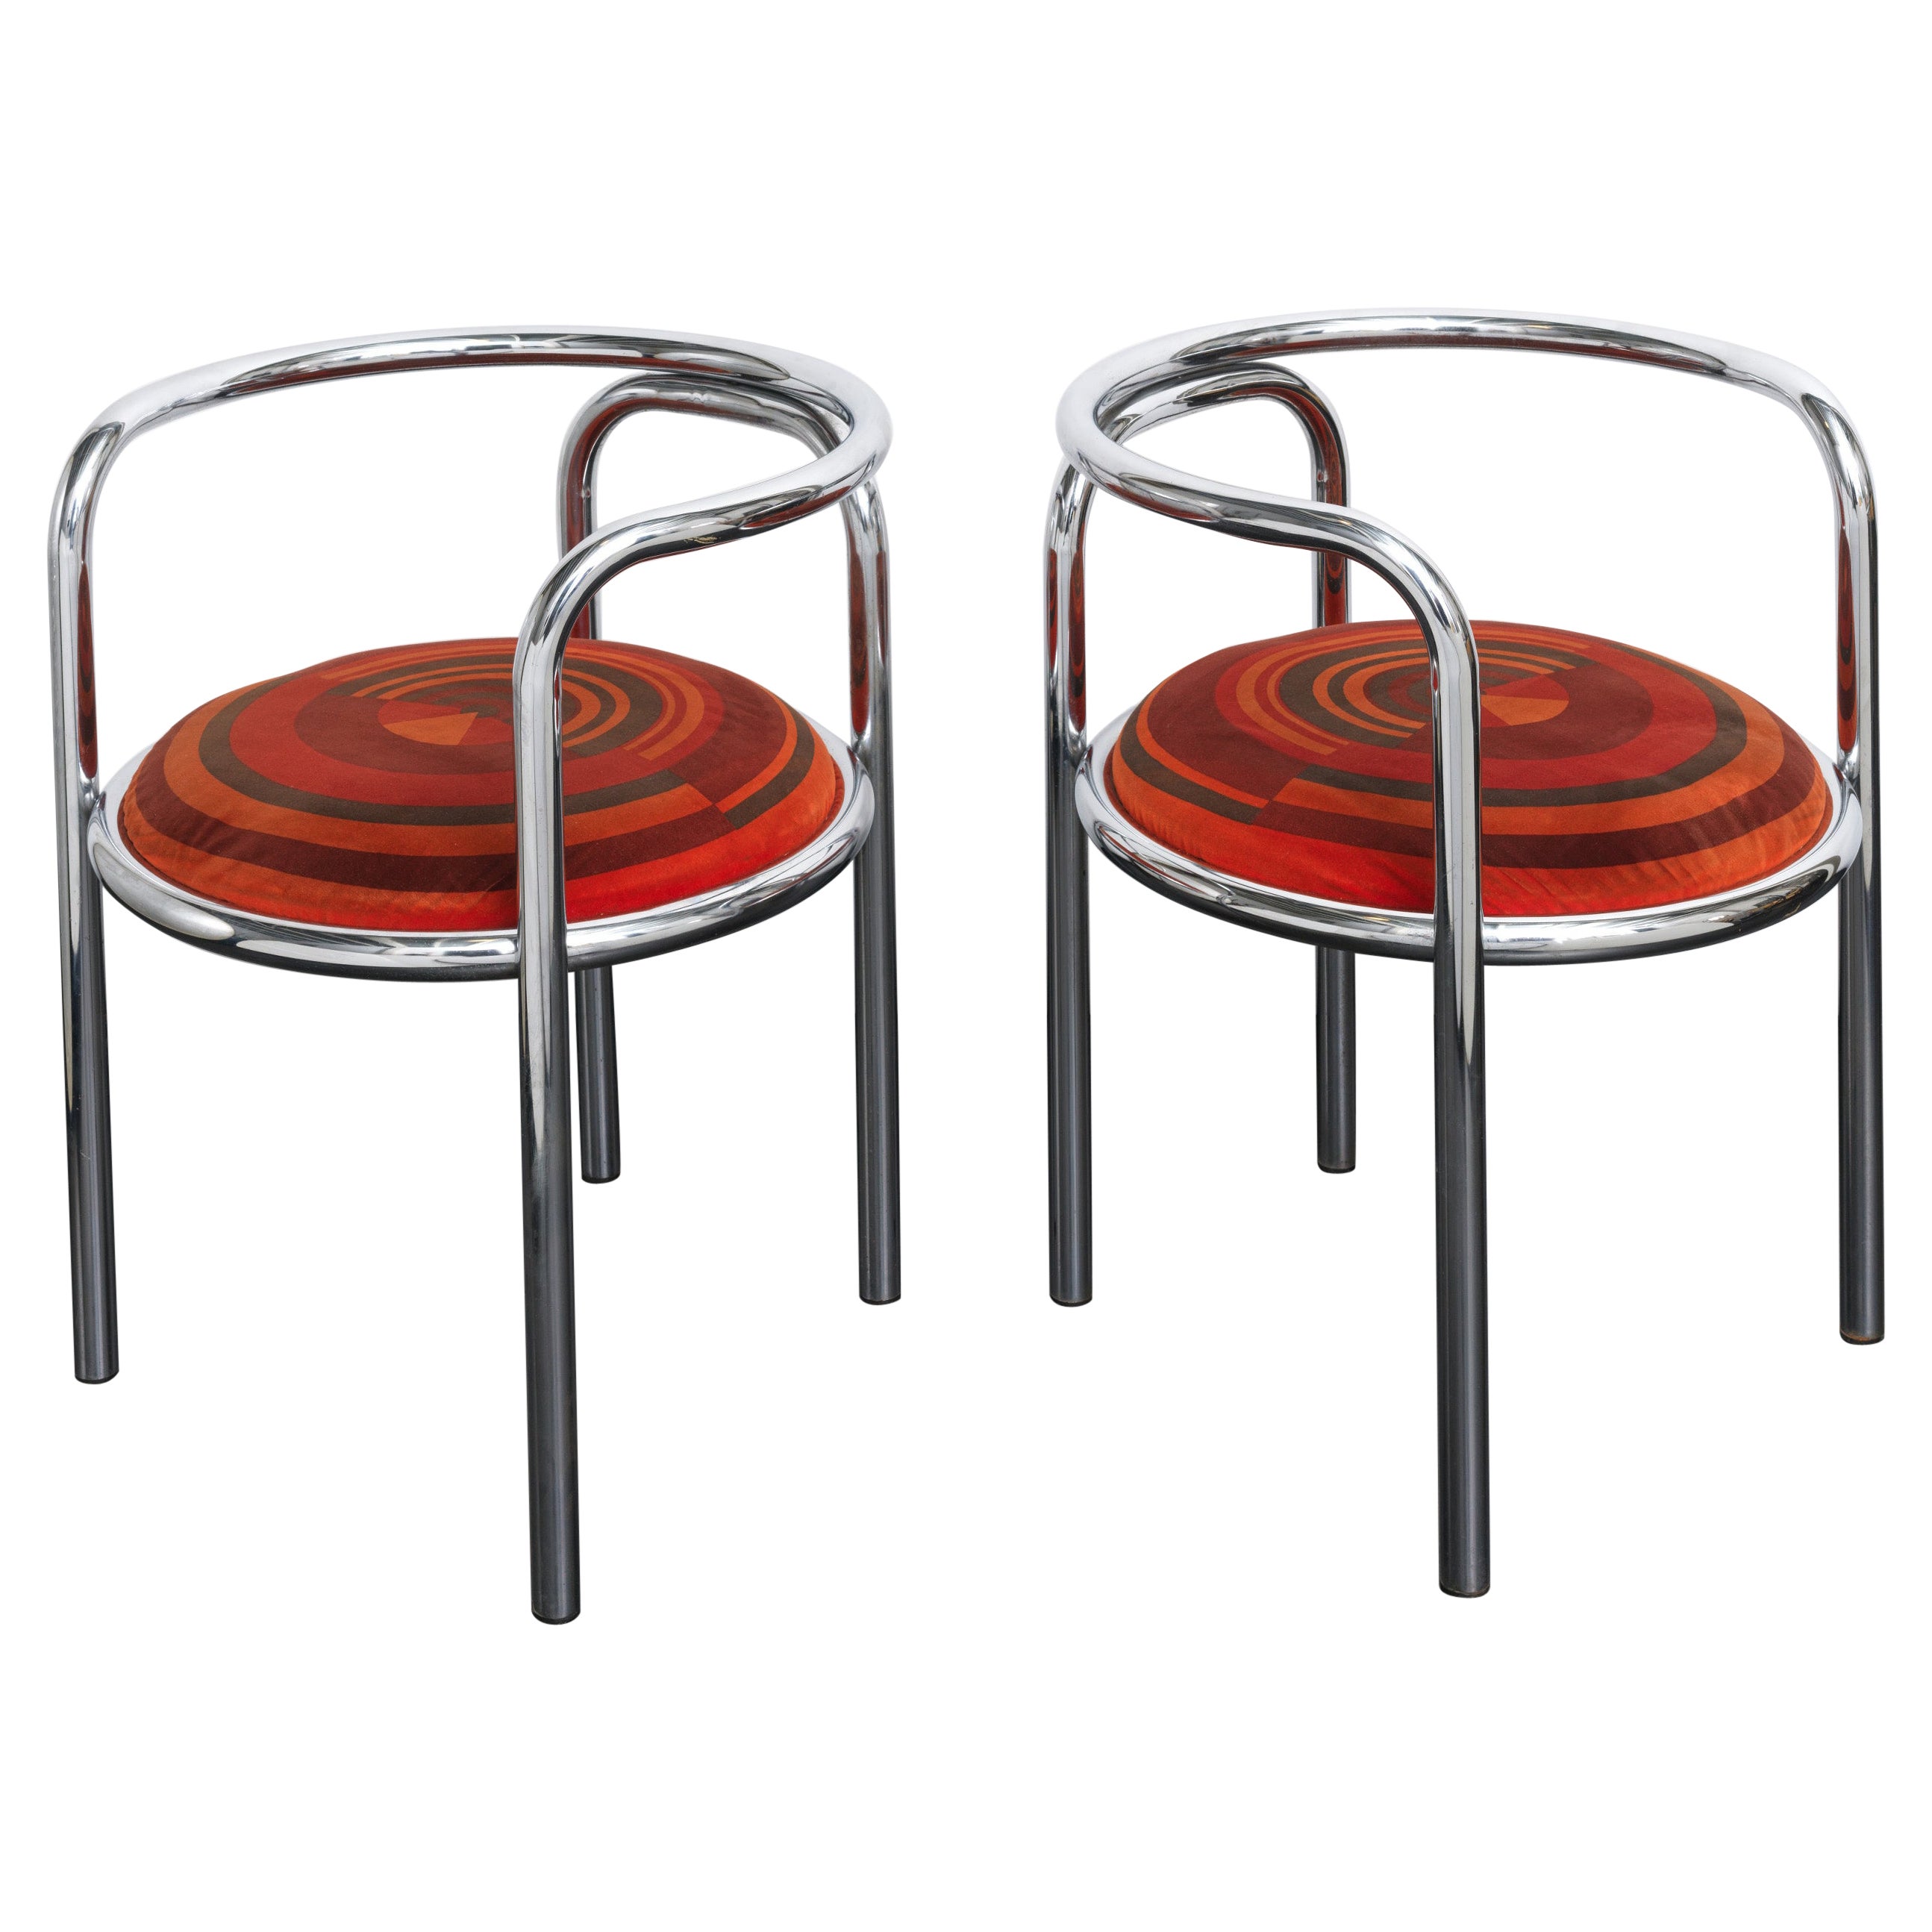 Pair of Rare, Early Edition ‘Locus Solus’ Chairs by Gae Aulenti, 1964 For Sale